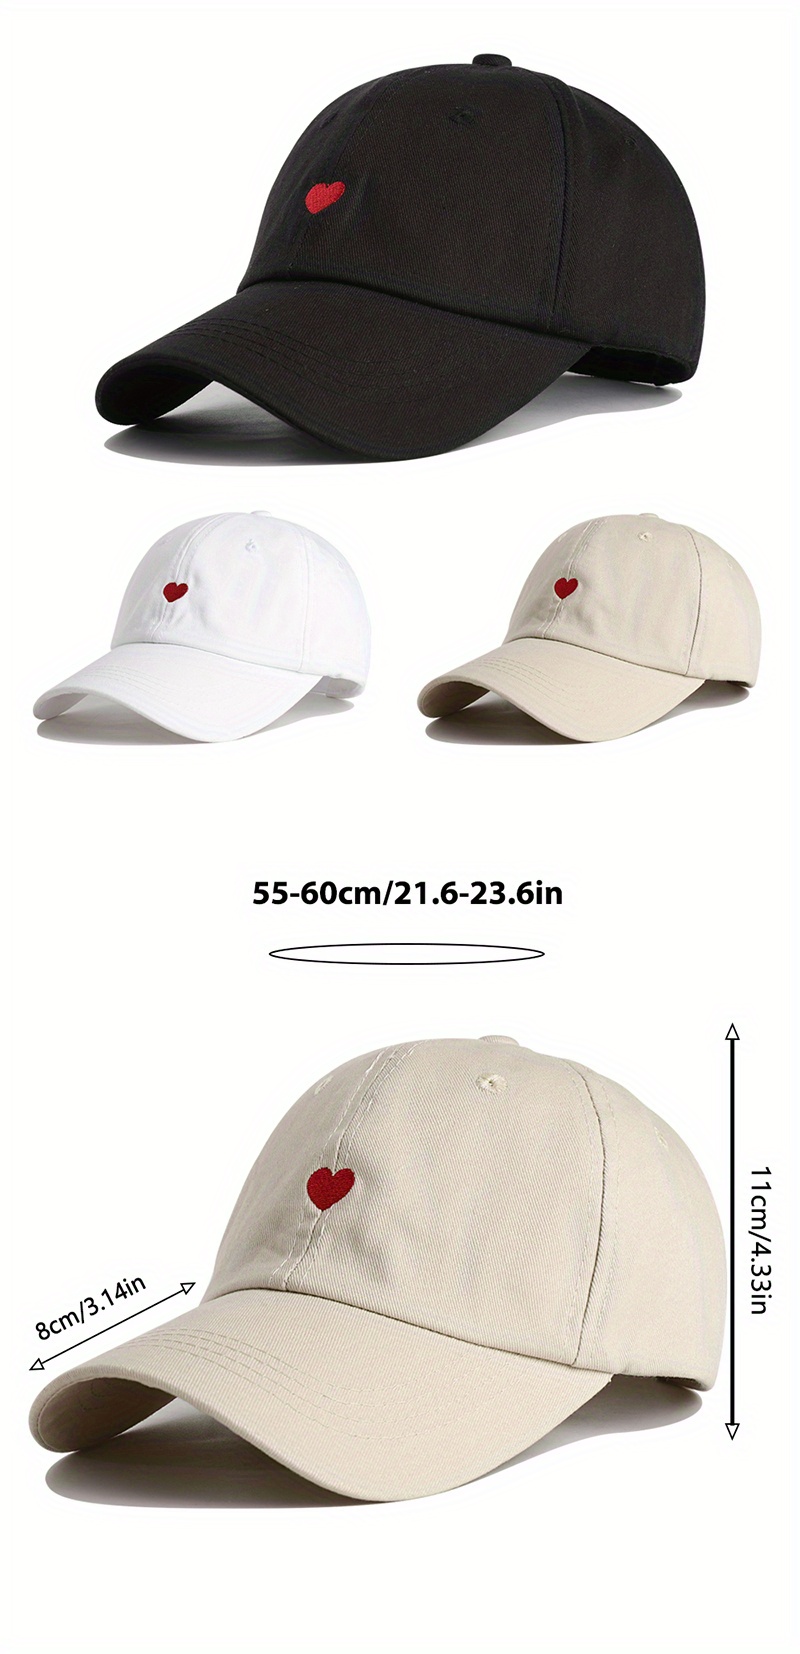 Triangular Waterproof Baseball Caps For Men And Women Designer Hats With  Inverted Triangle Design, Ideal For Sports And Outdoor Activities From  Dpit, $32.18